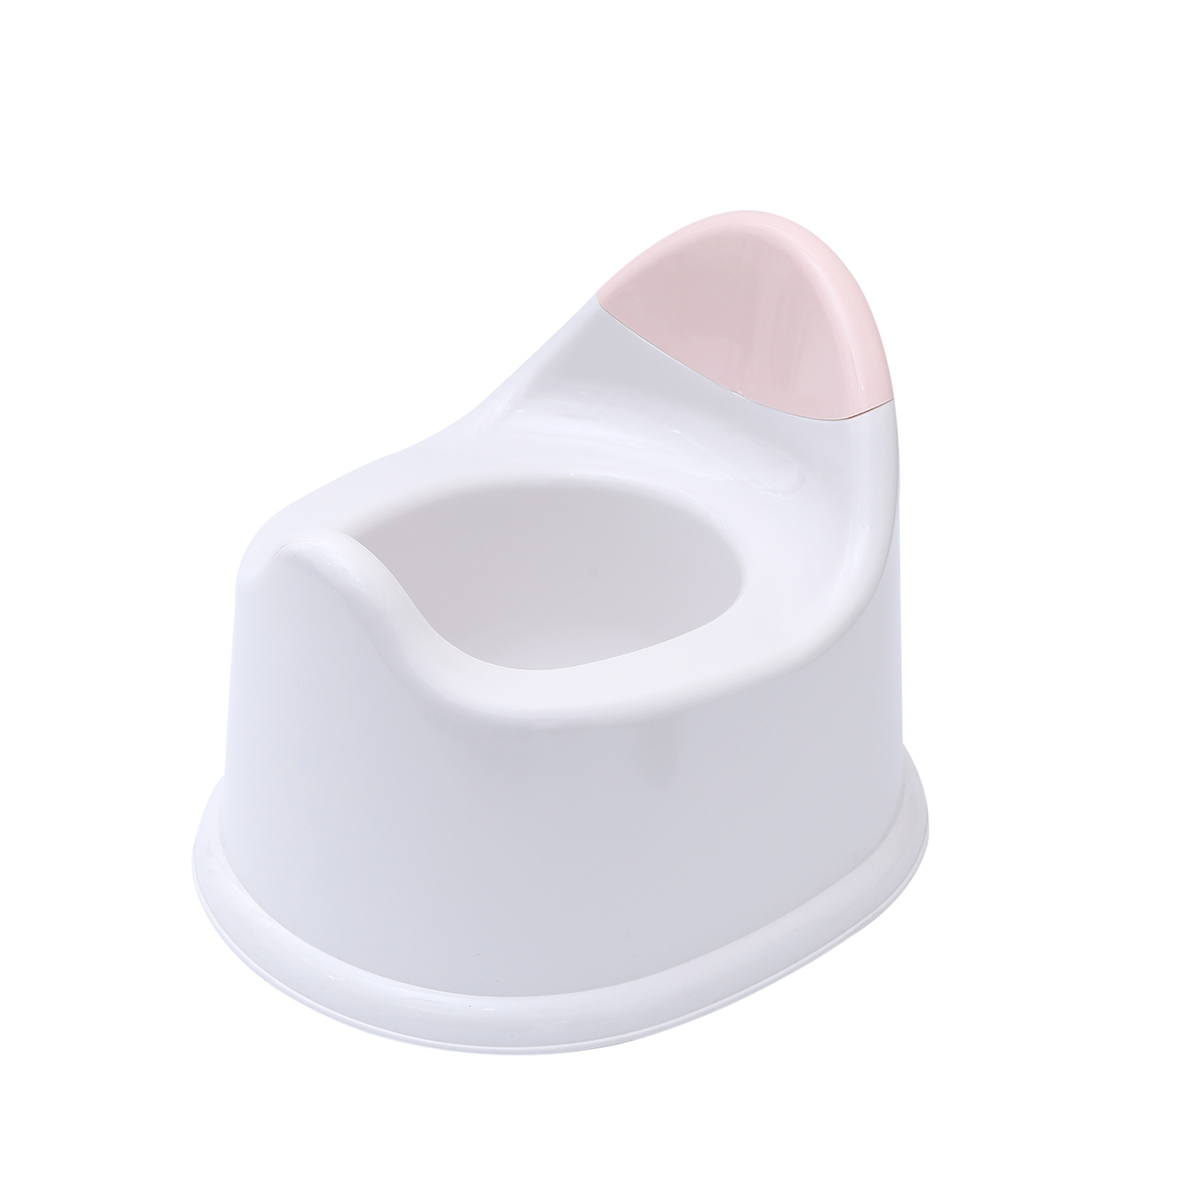 New Arrival Bathroom Simulation Potty Chair Baby Potty Chair For Girl Kids Toilet Training